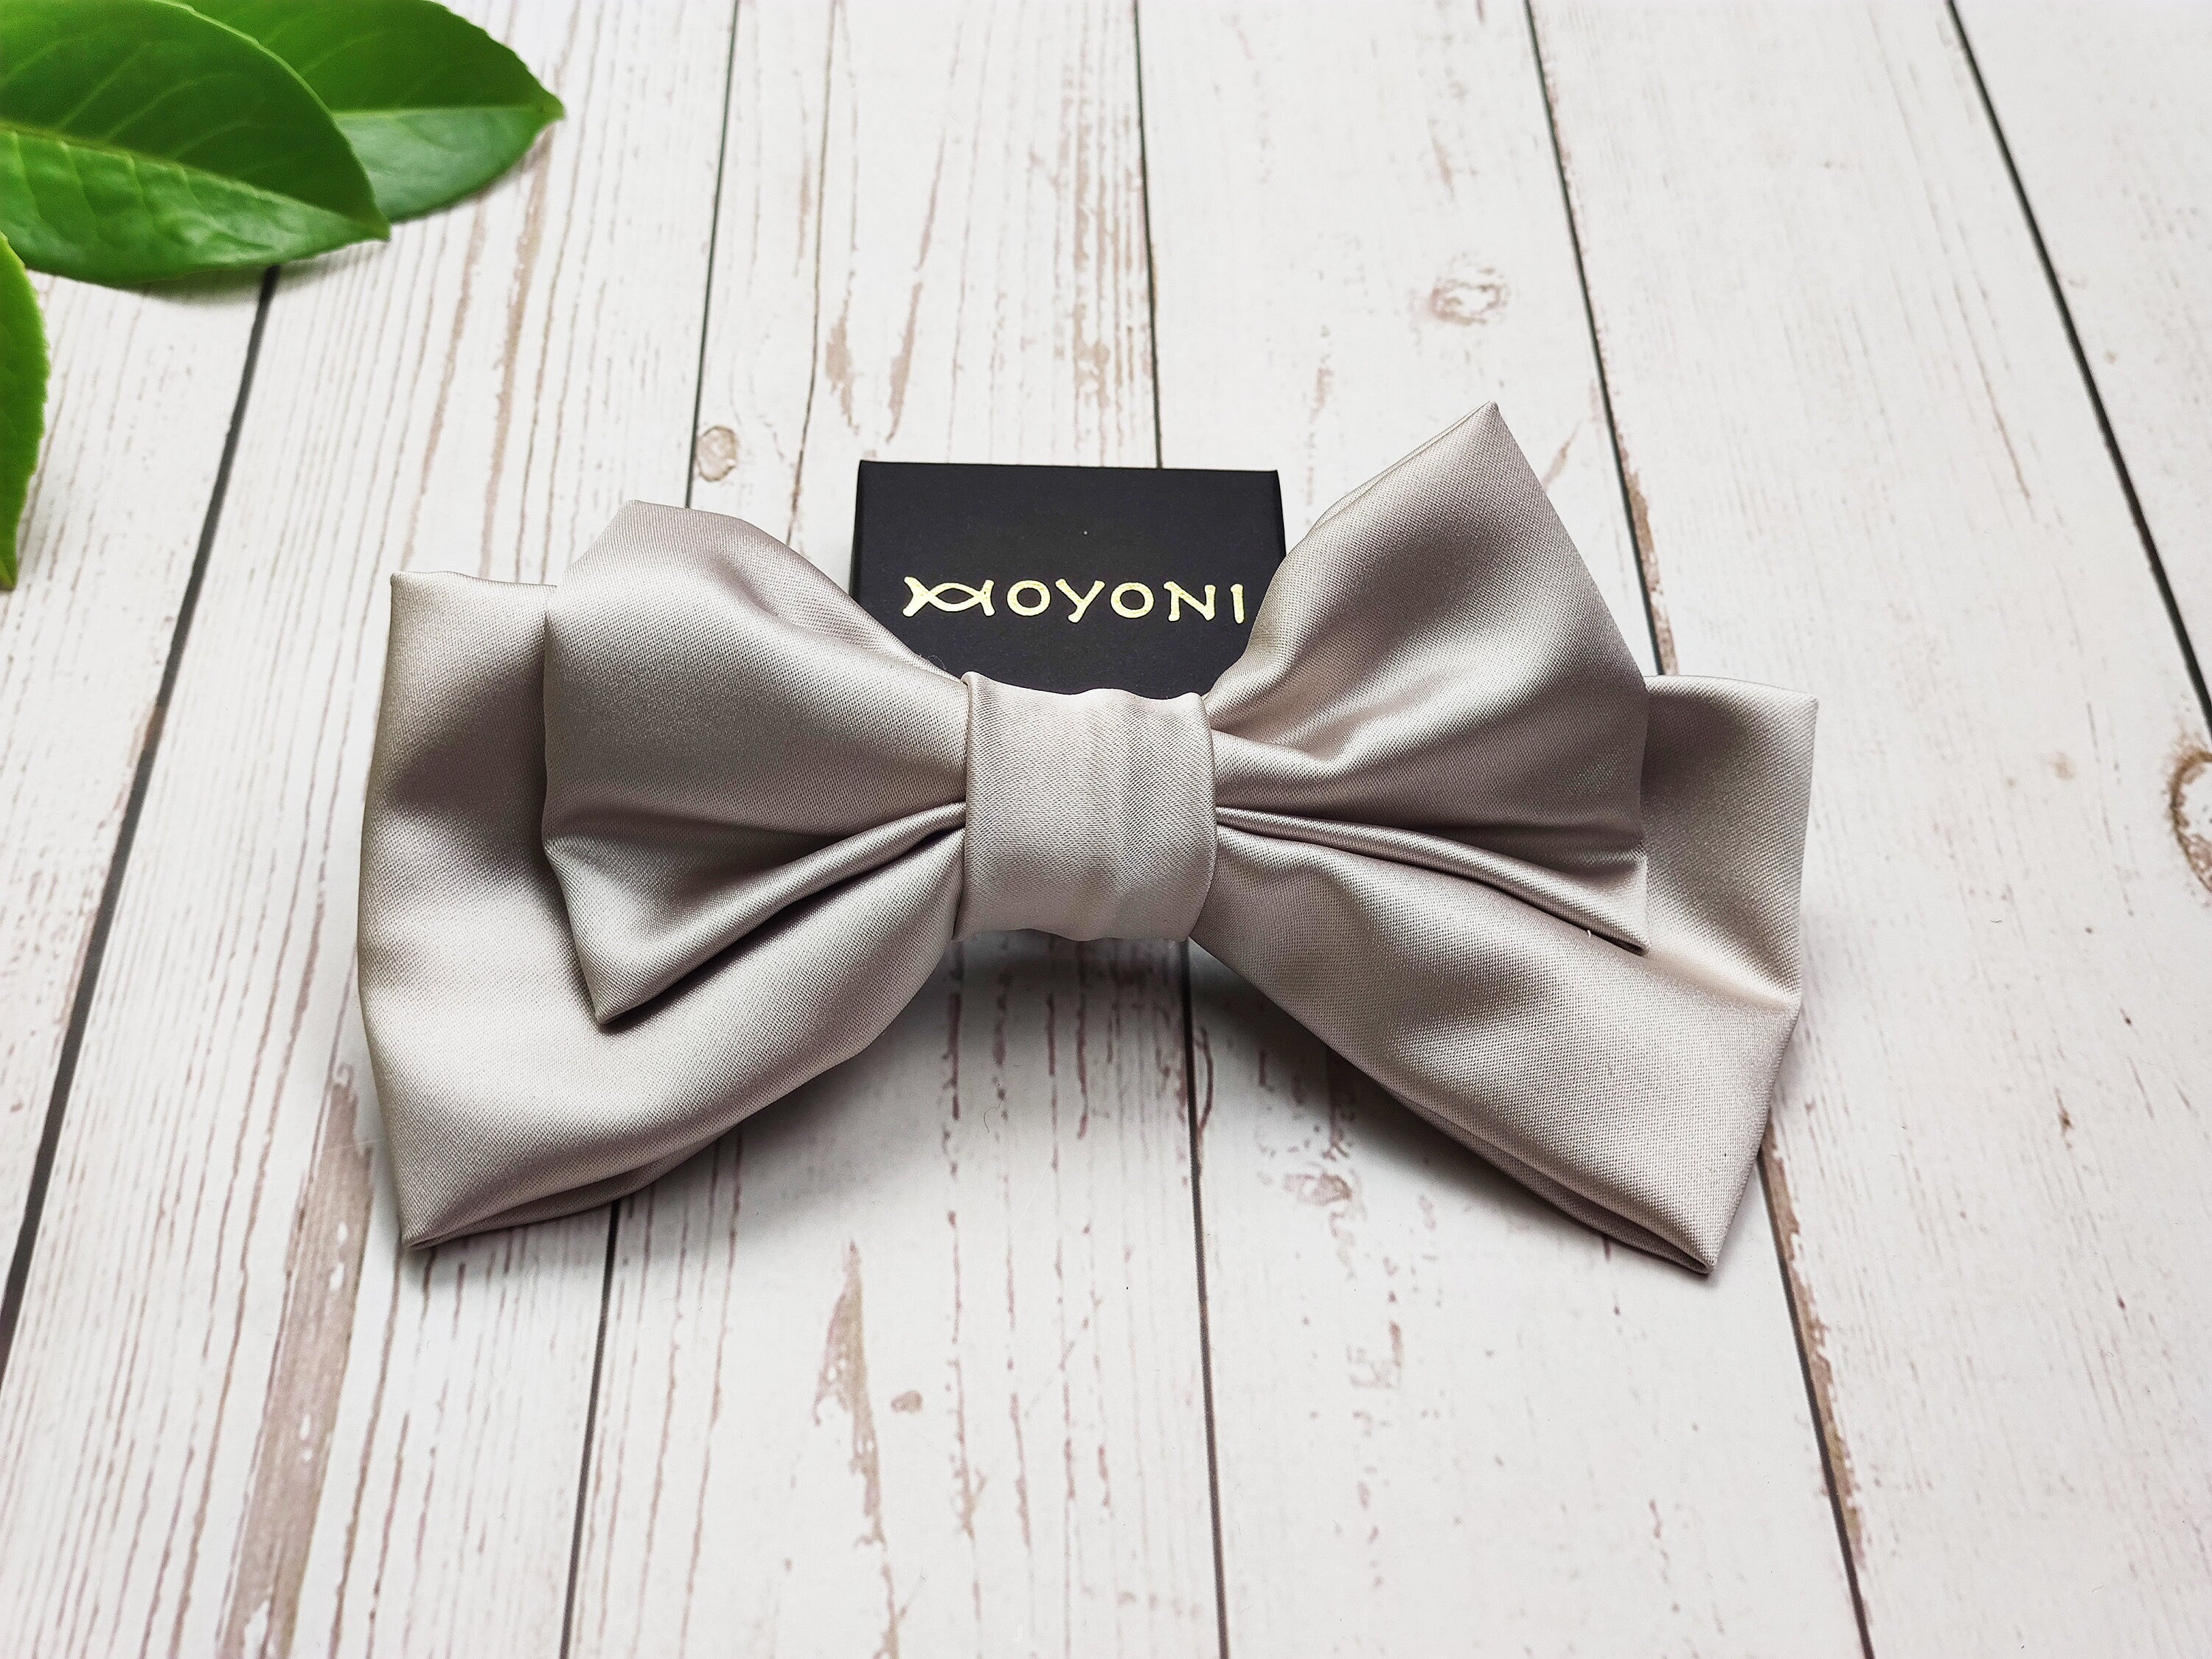 Get ready to turn heads with these handmade brick and beige satin hair clips with a bow. The fashionable hair accessory is perfect for adding a touch of style to any outfit, whether dressed up or dressed down.